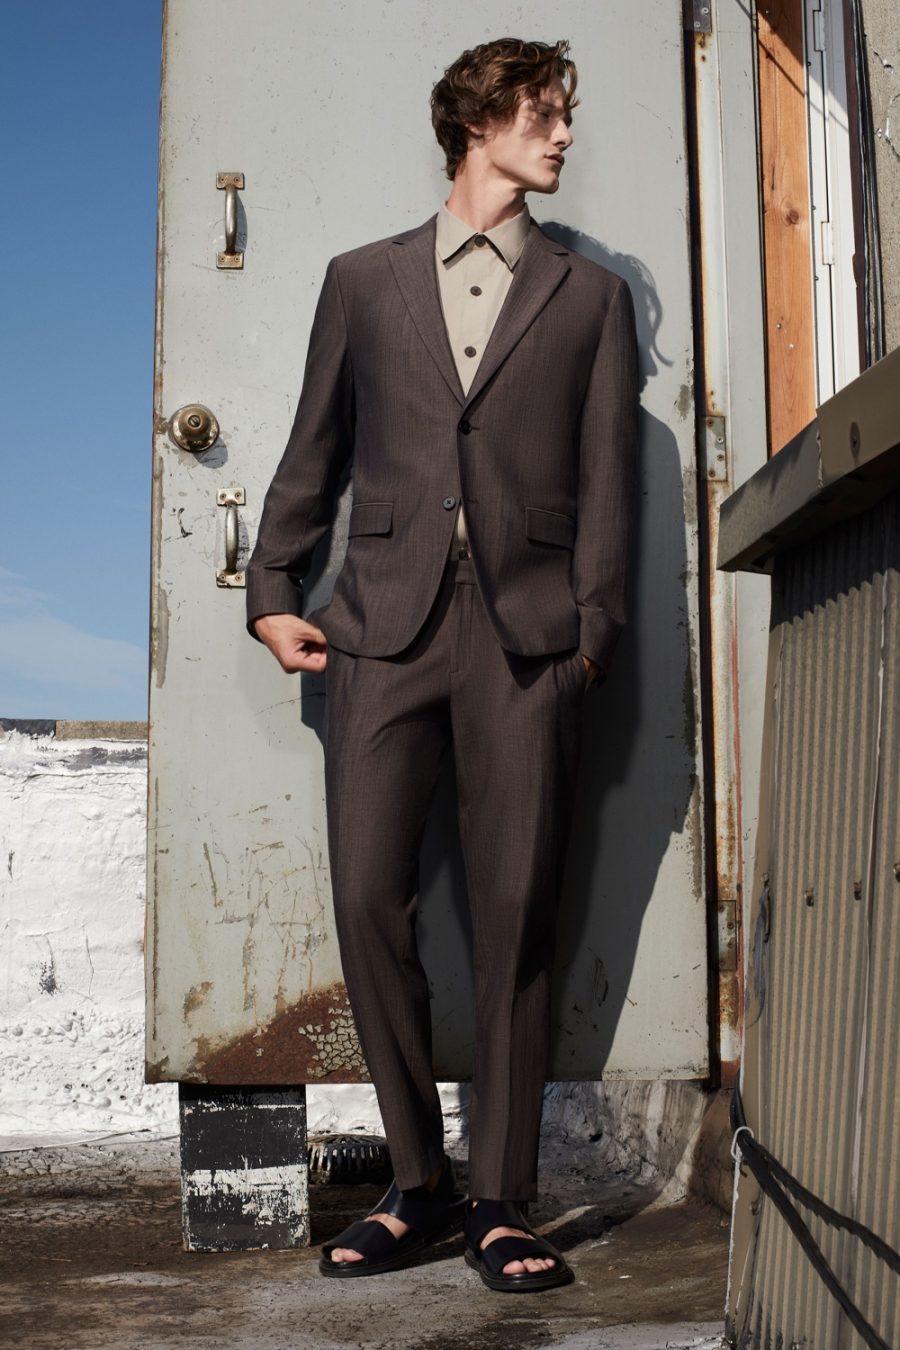 Front and center, Ryan Keating dons a suit from Theory's spring-summer 2021 men's collection.